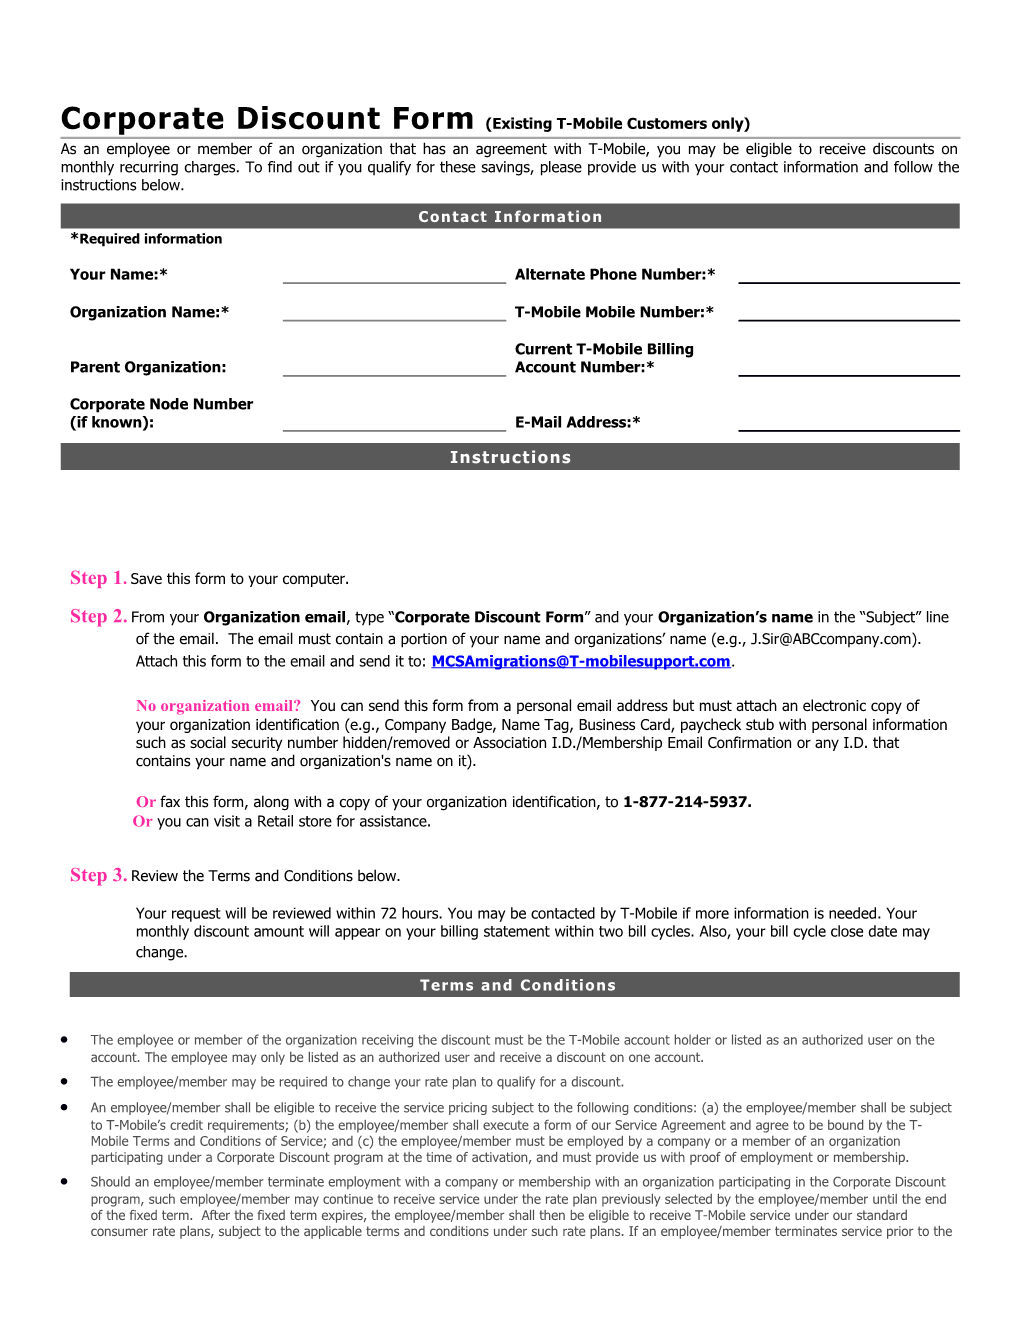 Corporate Discount Form(Existing T-Mobile Customers Only)